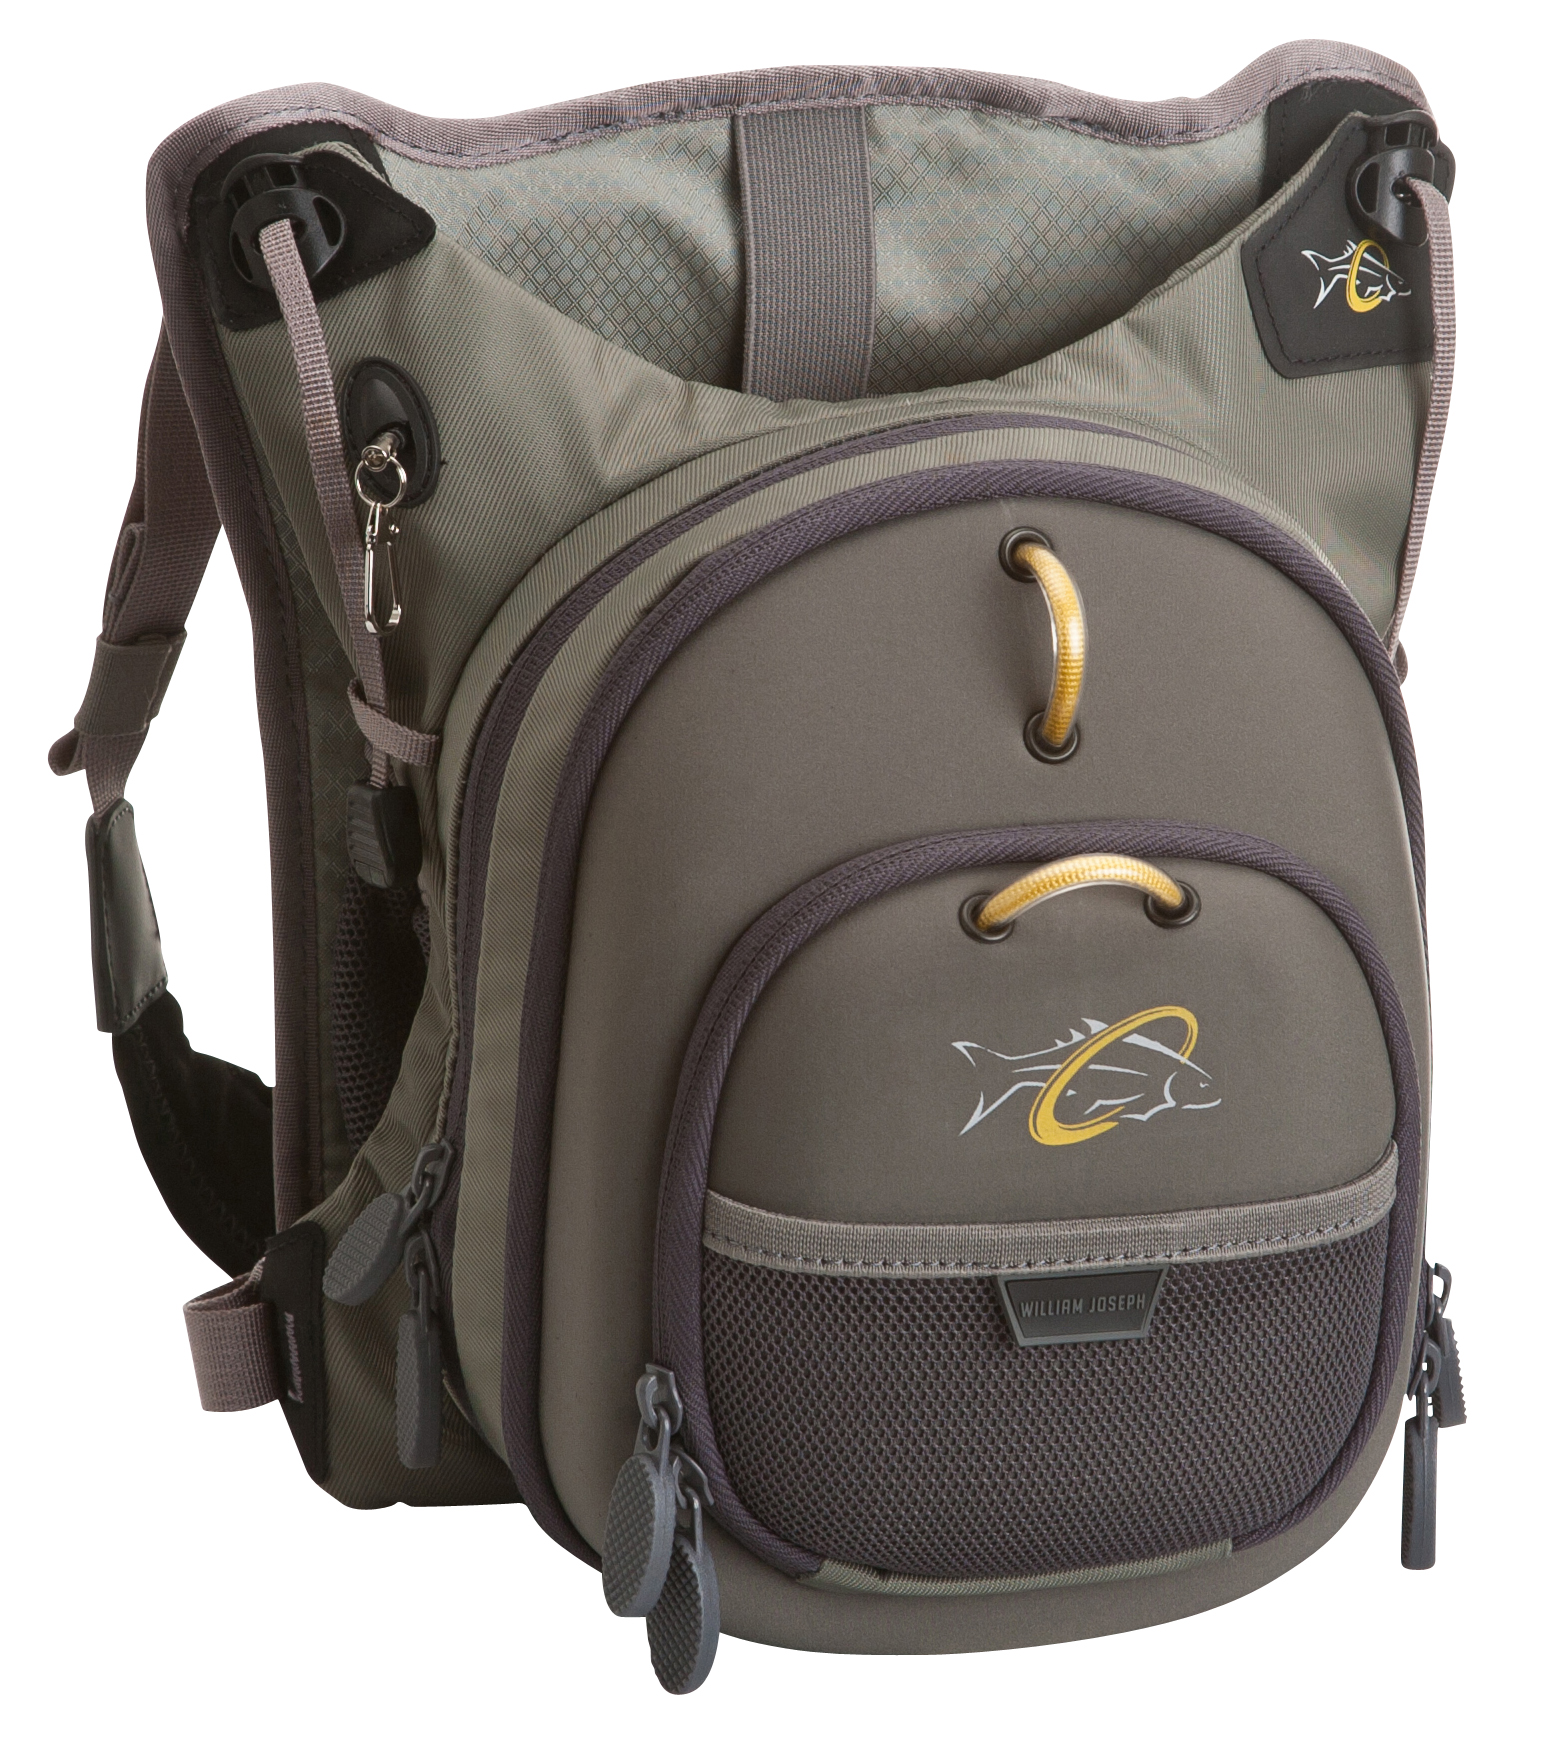 SOLD! – William Joseph – Confluence Chest Back Pack – LIKE NEW! – $100 –  The First Cast – Hook, Line and Sinker's Fly Fishing Shop